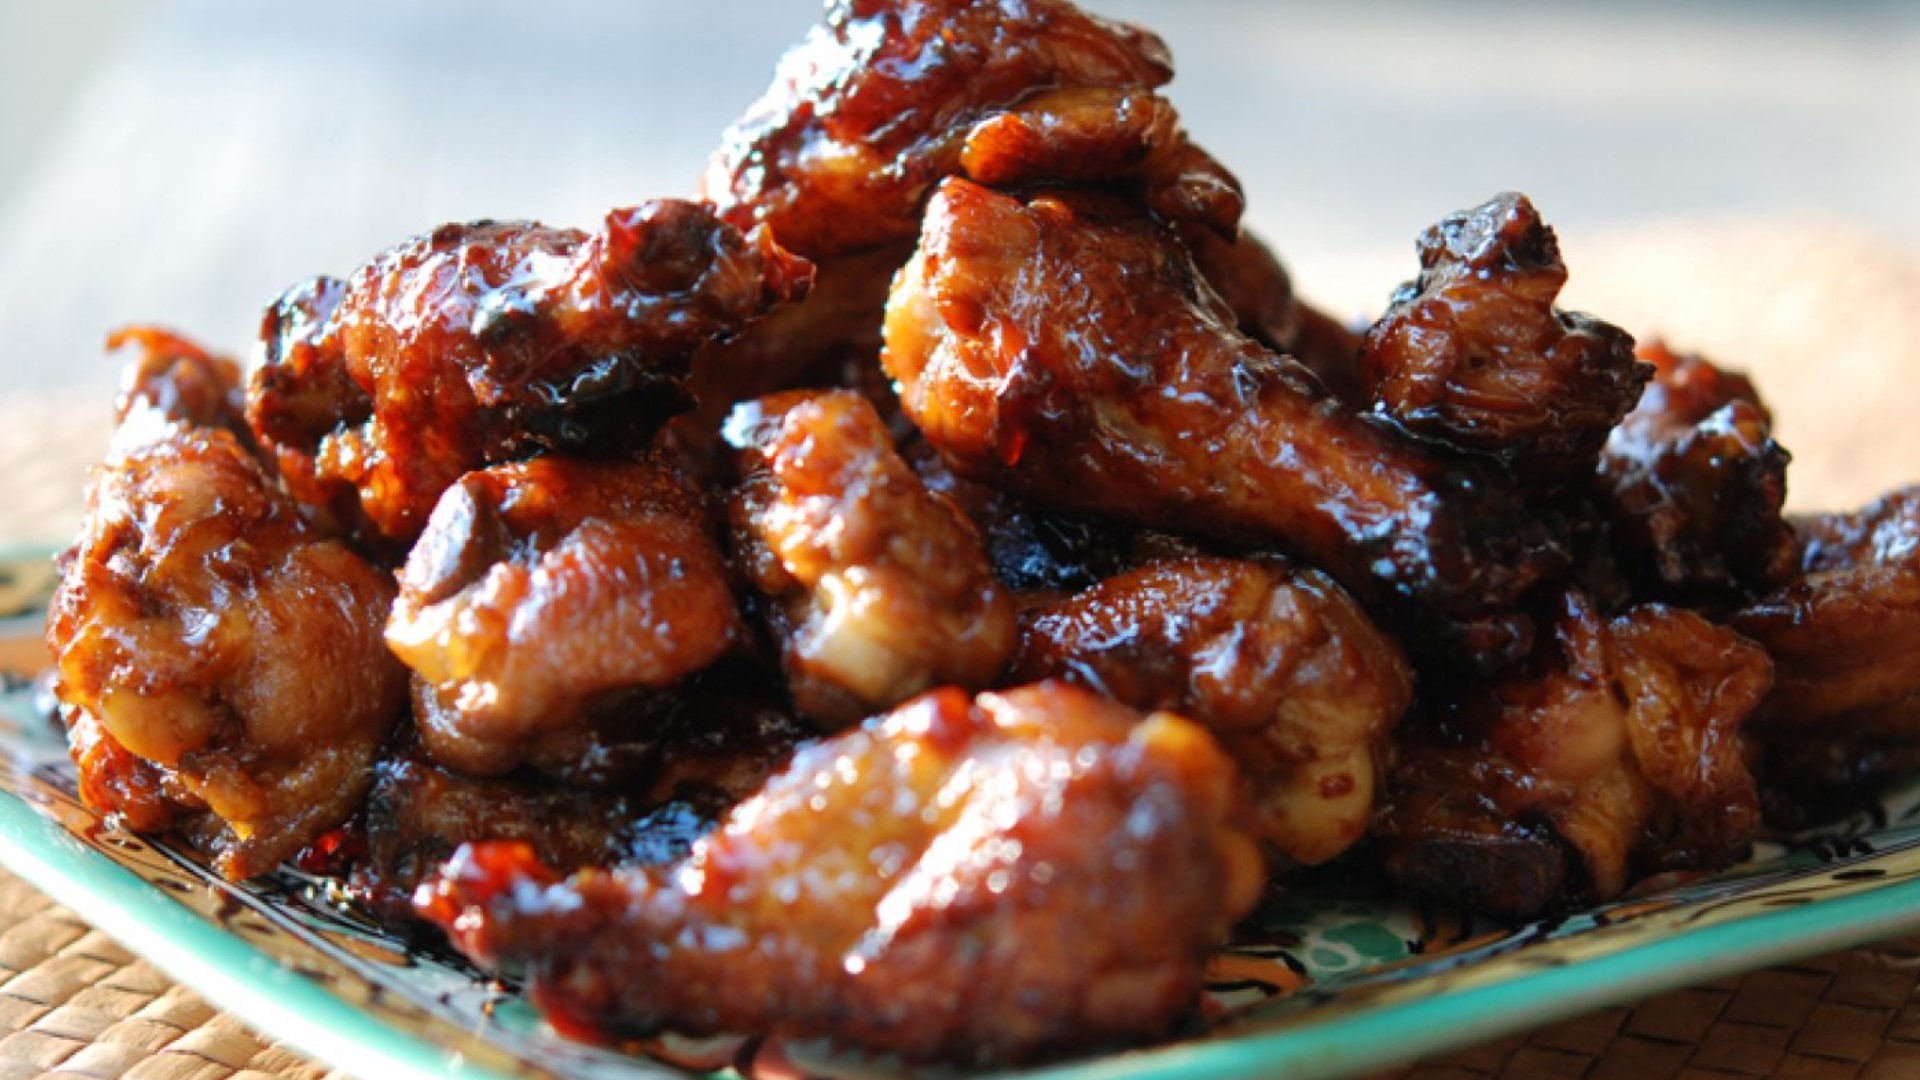 Minnesota's own celebrity chef Andrew Zimmern has been busy gearing up for Super Bowl LV and the 2021 Taste of the NFL. Check out his most popular wing recipe!